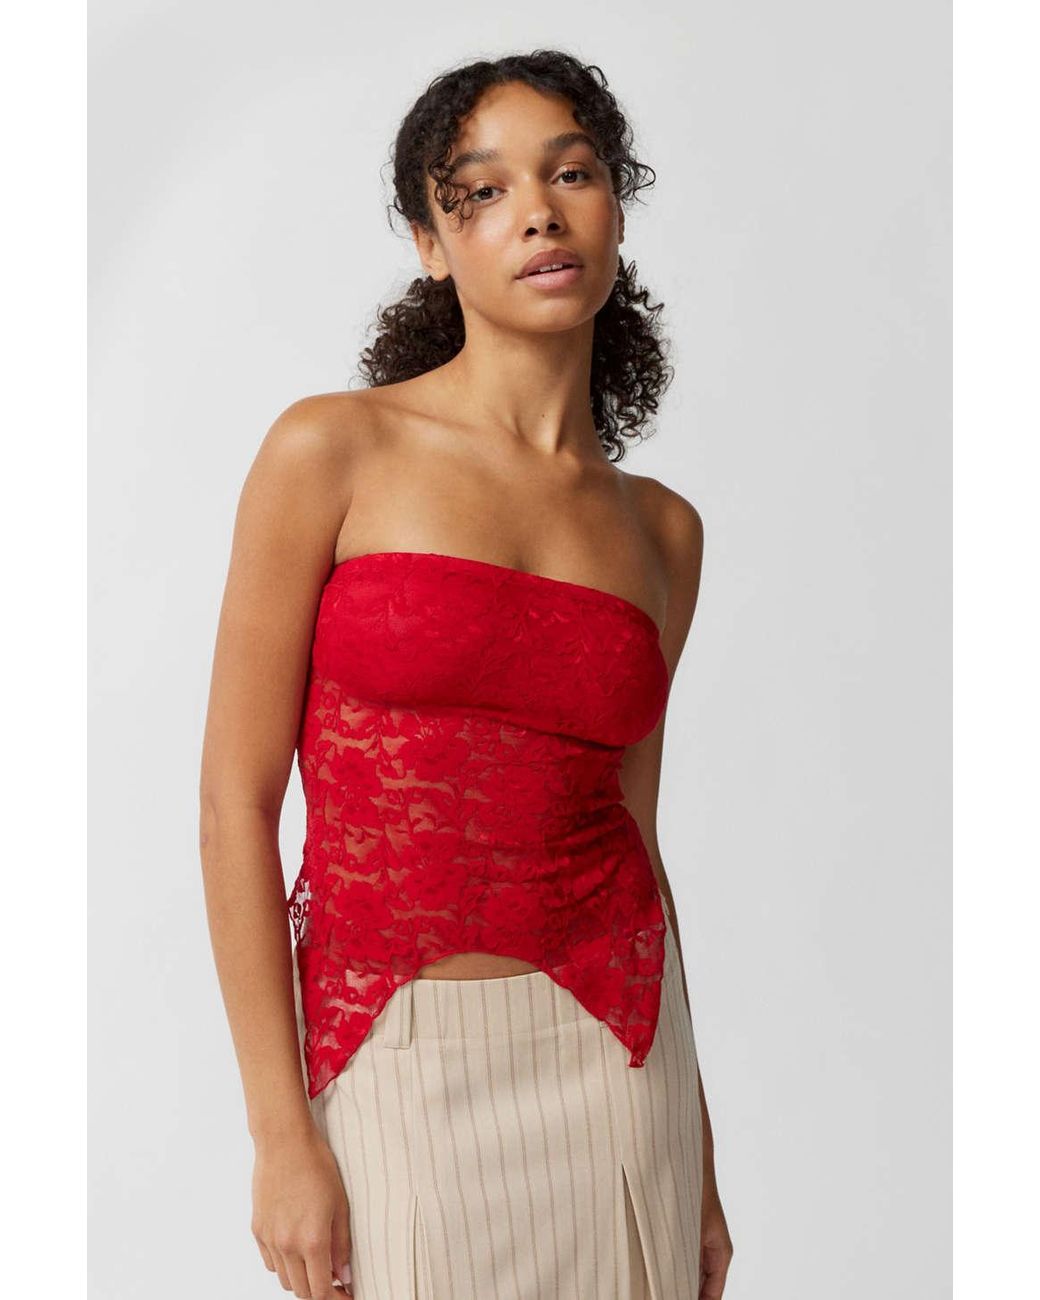 Renewal Lace Urban Lyst in Red Top Remnants Witchy Tube |